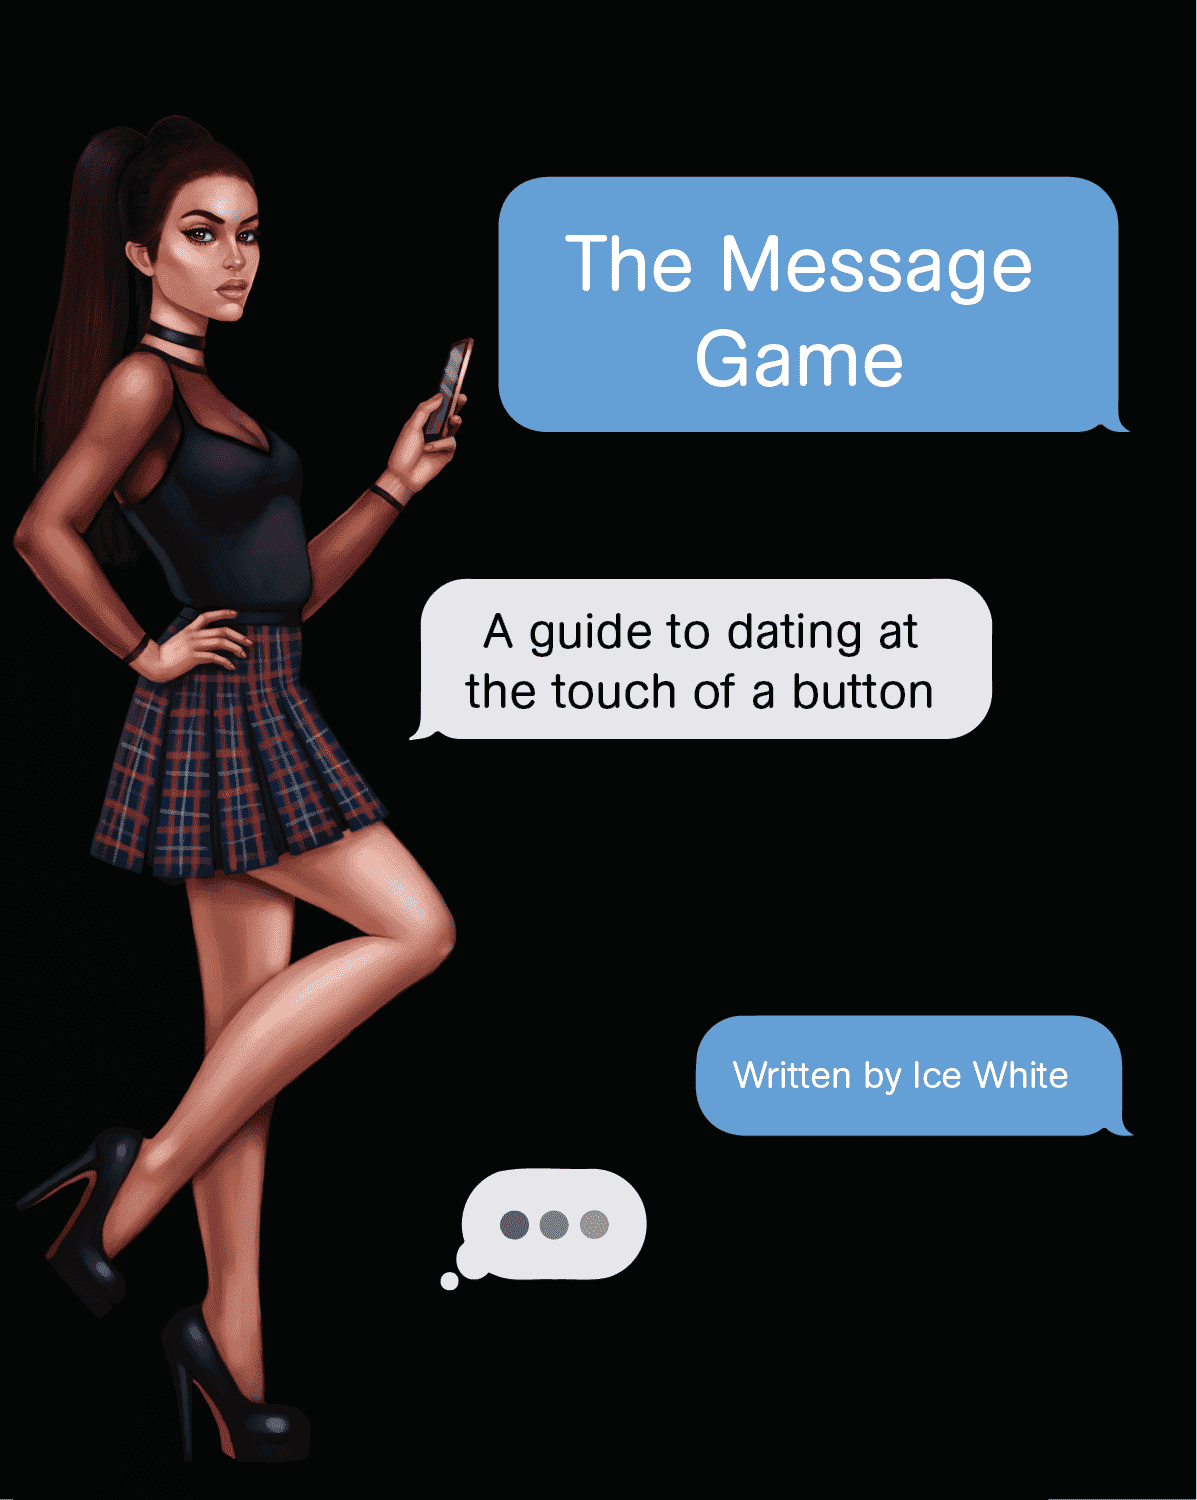 The Message Game Ice White Tinder Guide Instagram The Game Neil Strauss Seduction PUA Pickup Artist Book Books